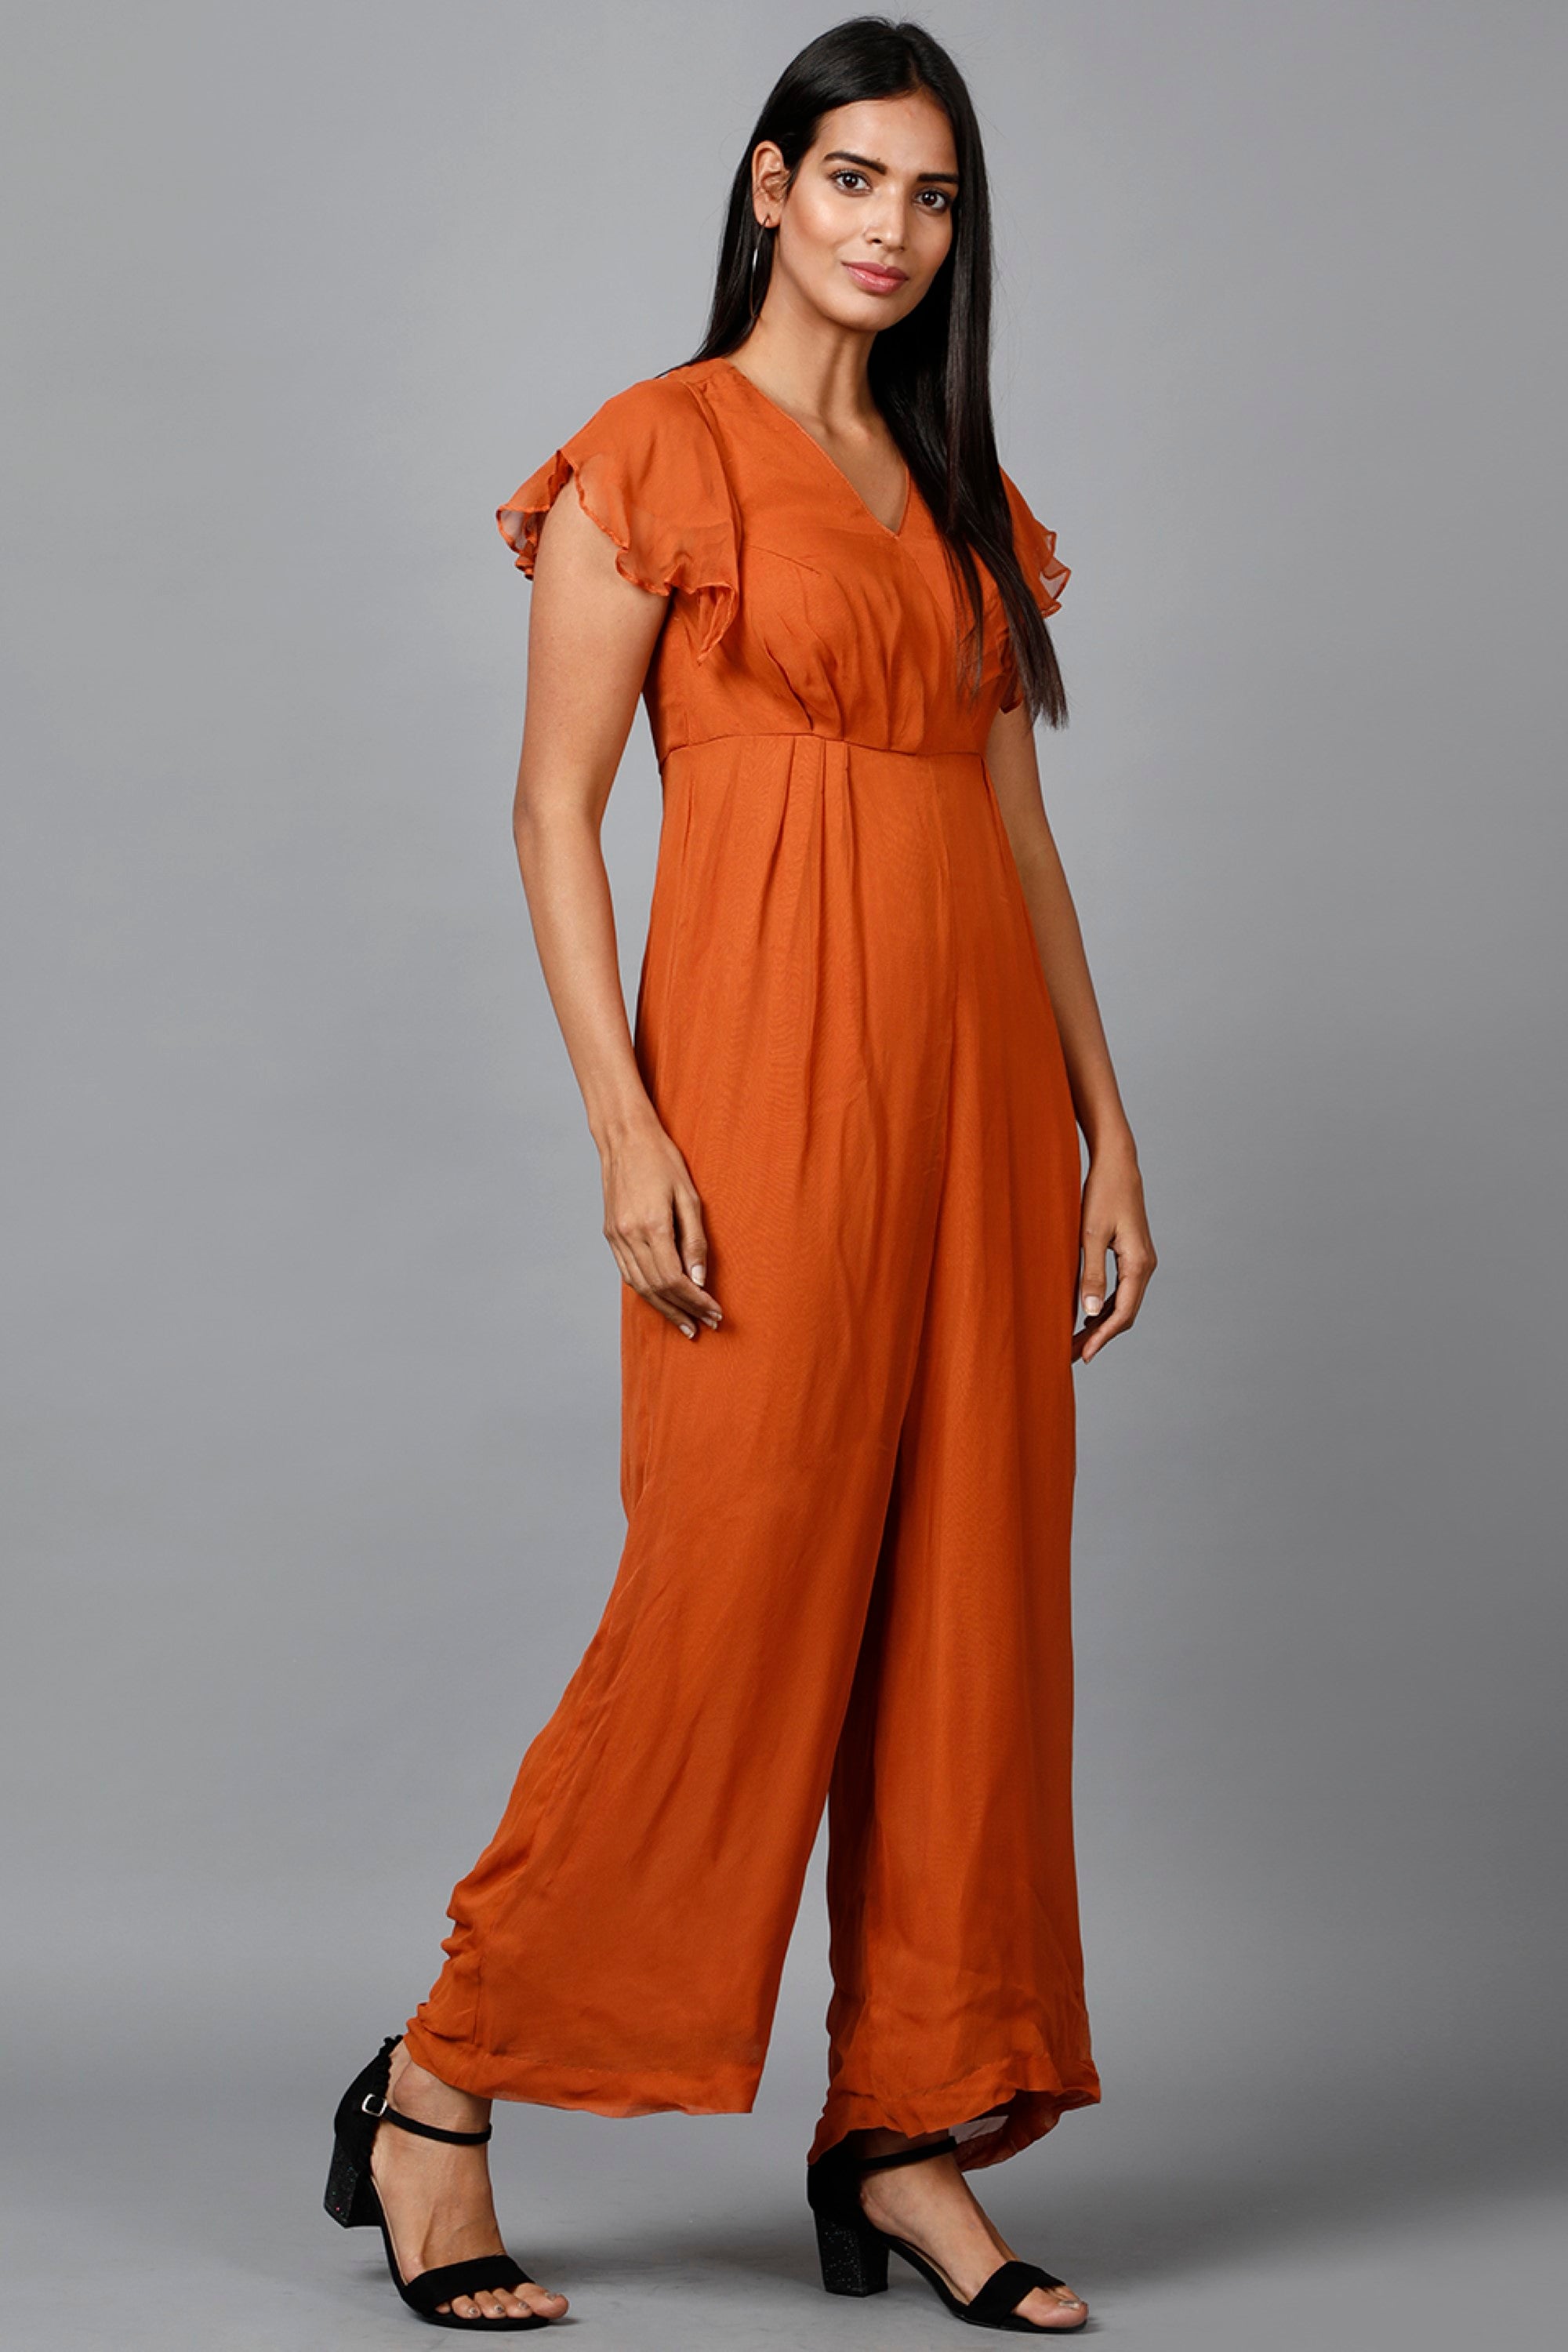 Women's Drape Party/ Casual Jumpsuit In Brown - MIRACOLOS by Ruchi